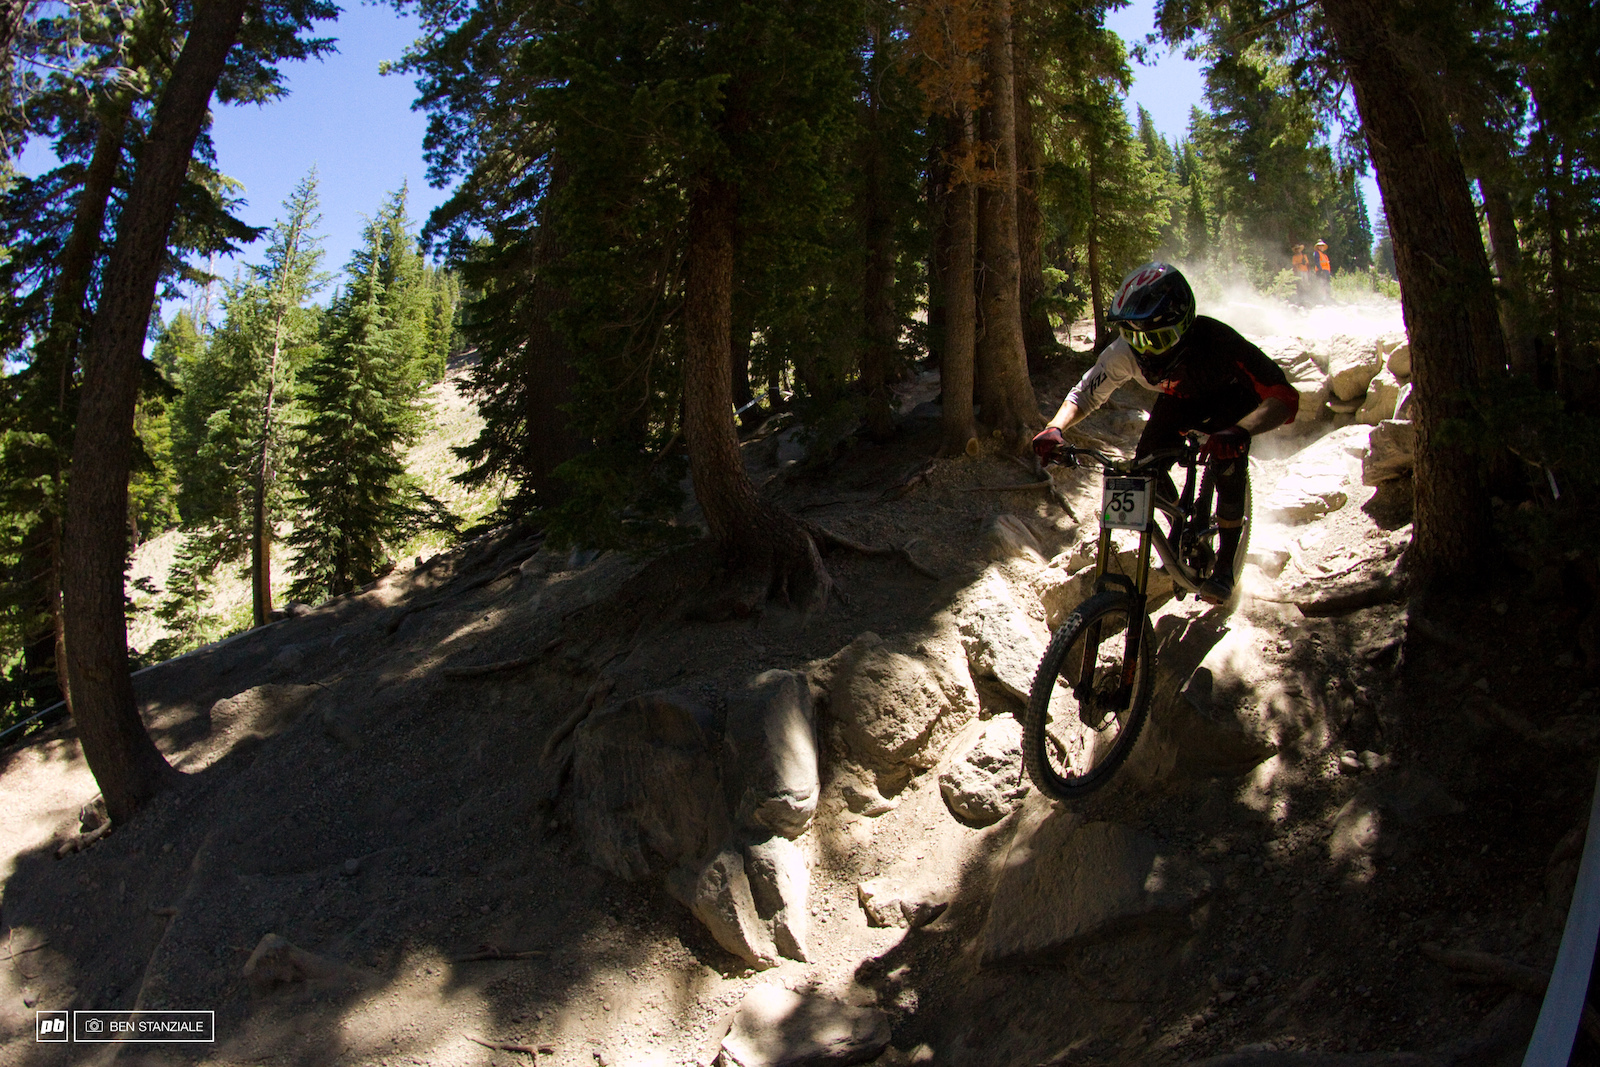 Shane Leslie makes the trip to Mammoth, blasts the rocks, and leaves a happy guy. 3rd Place for Shane Leslie